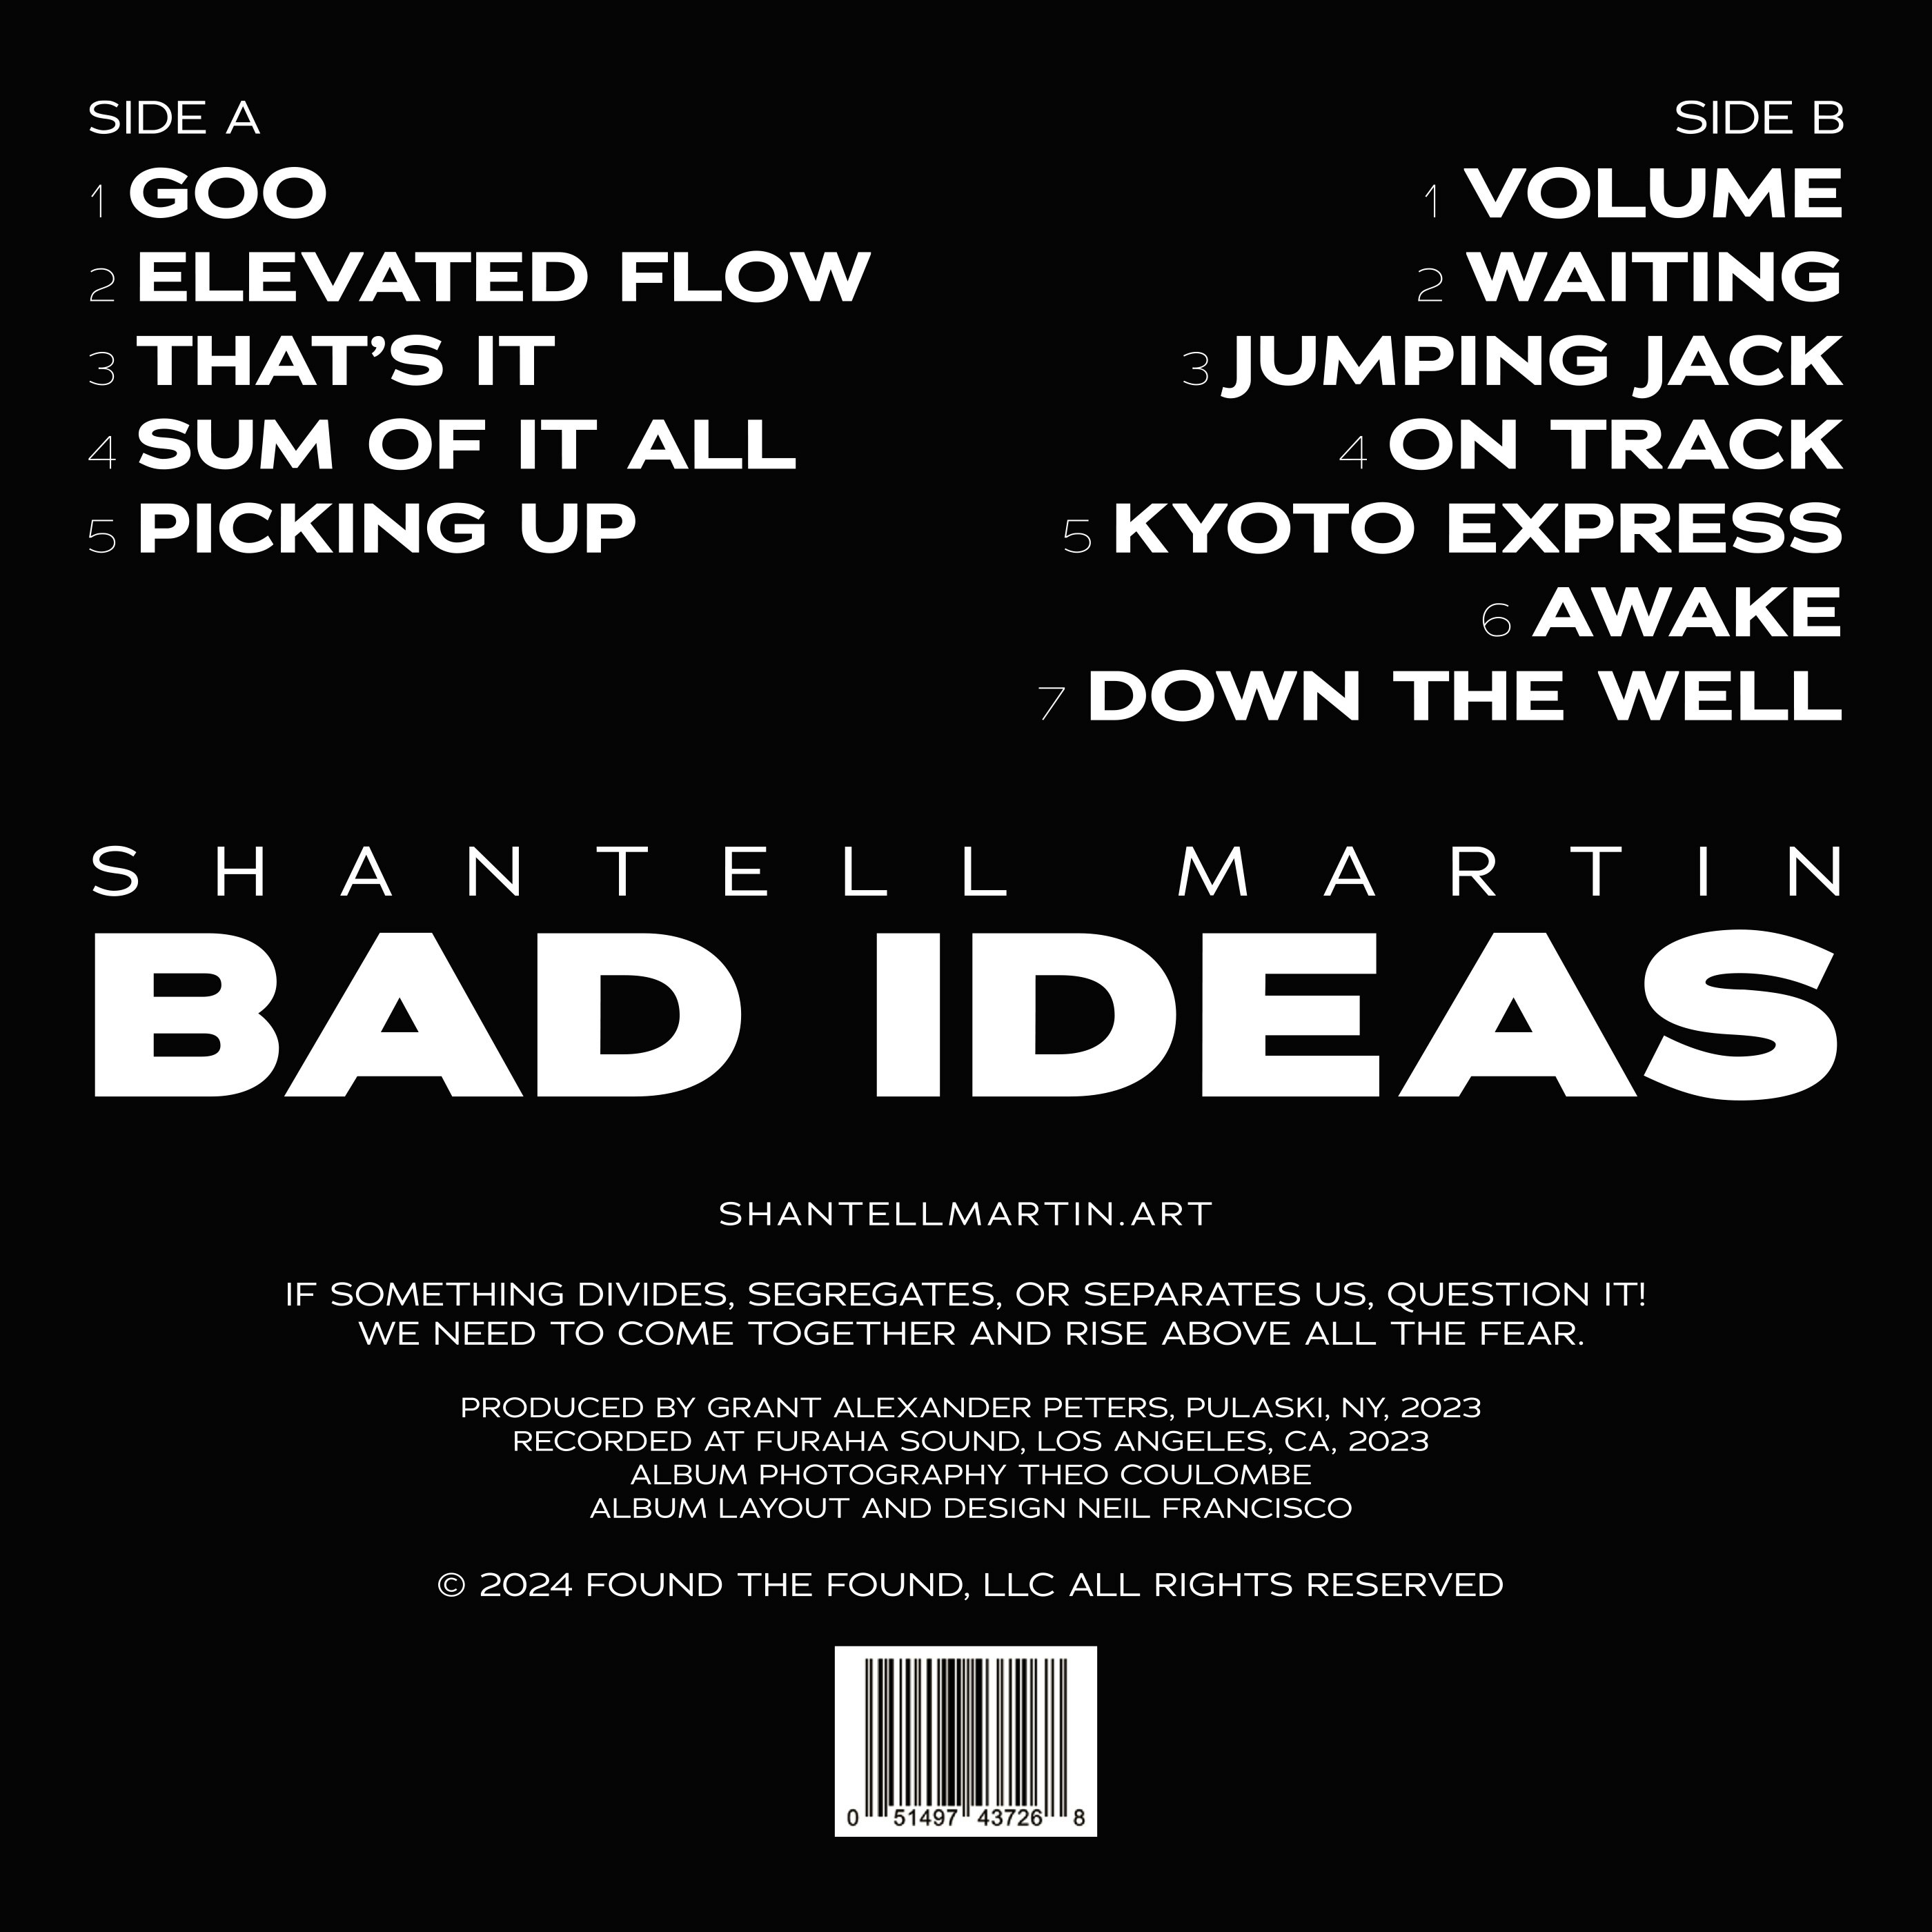 Bad Ideas back cover.